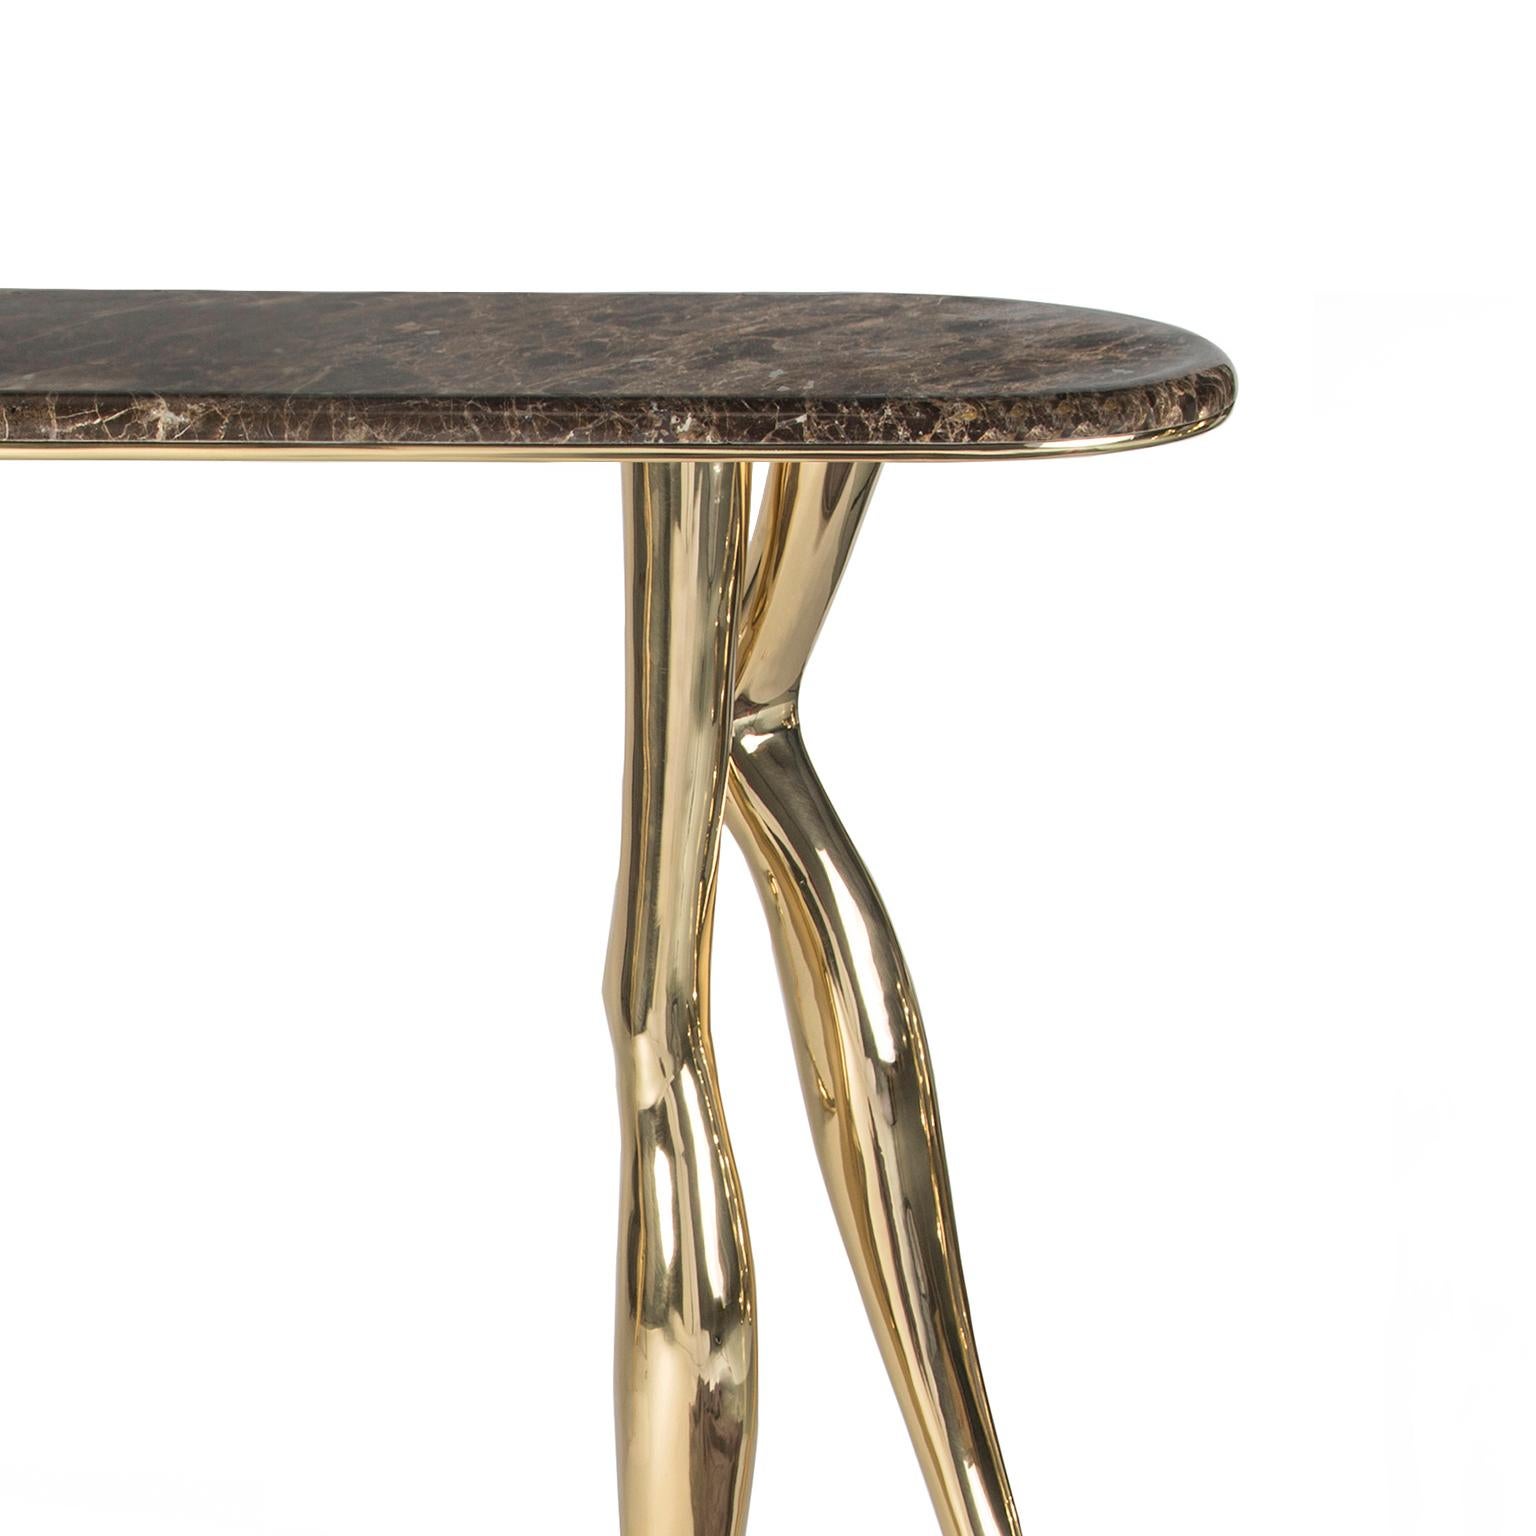 Modern Monroe Console Table, Polished Brass, Emperador Marble, Art Console In New Condition For Sale In Oporto, PT